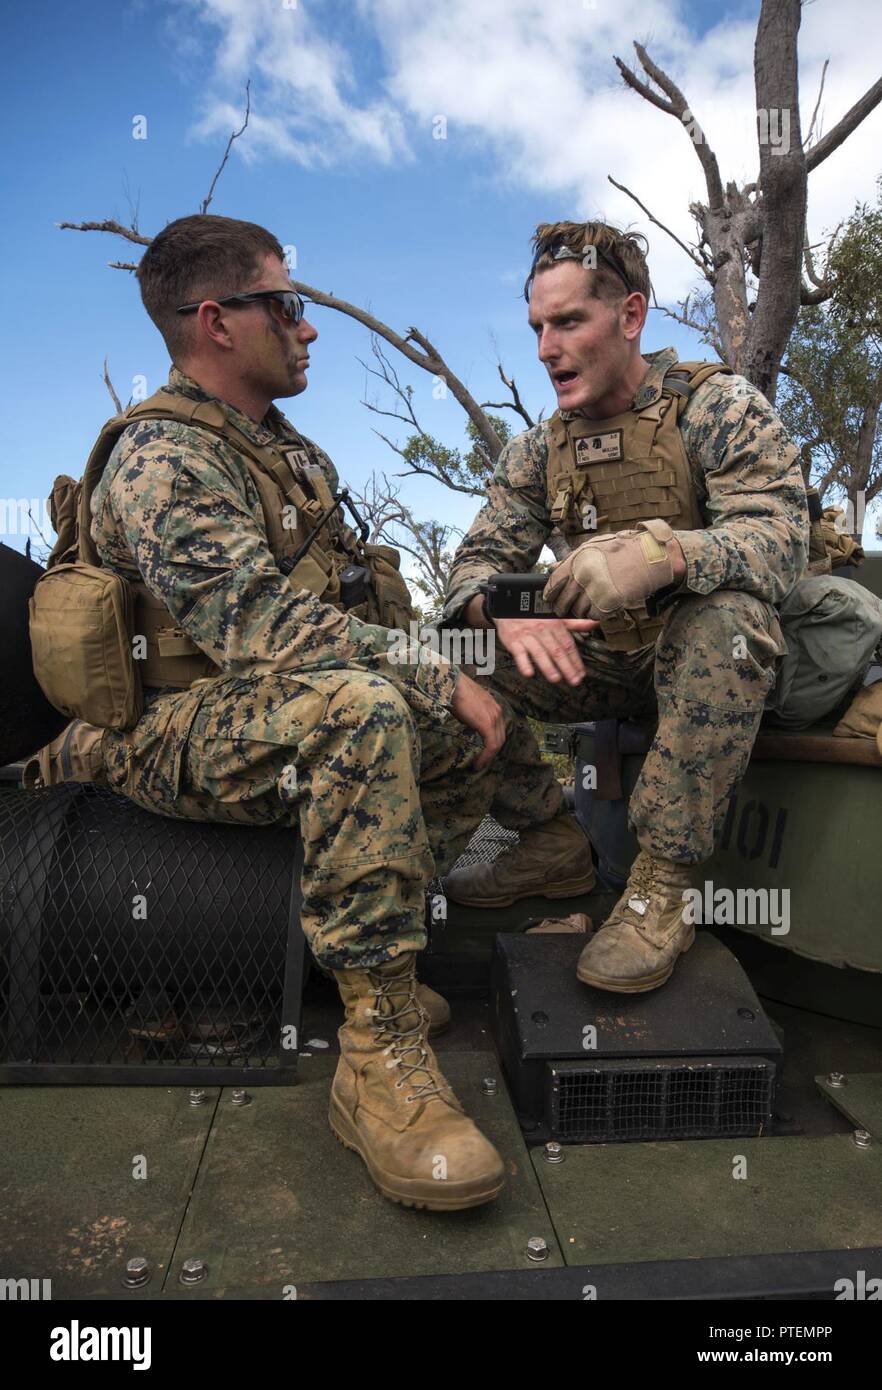 TOWNSHEND ISLAND, Australia (July 13, 2017) 1st Lt. James Heisler (left), from Pittsburgh, and Cpl. Ken Mullins, from Lapeer, Mich., both assigned to Battalion Landing Team, 3rd Battalion, 5th Marines, part of the 31st Marine Expeditionary Unit (MEU), discuss the terrain of a patrol route as part of a large-scale amphibious assault during Talisman Saber 17. The 31st MEU is working in tandem with Australian counterparts to train together in the framework of stability operations. Stock Photo